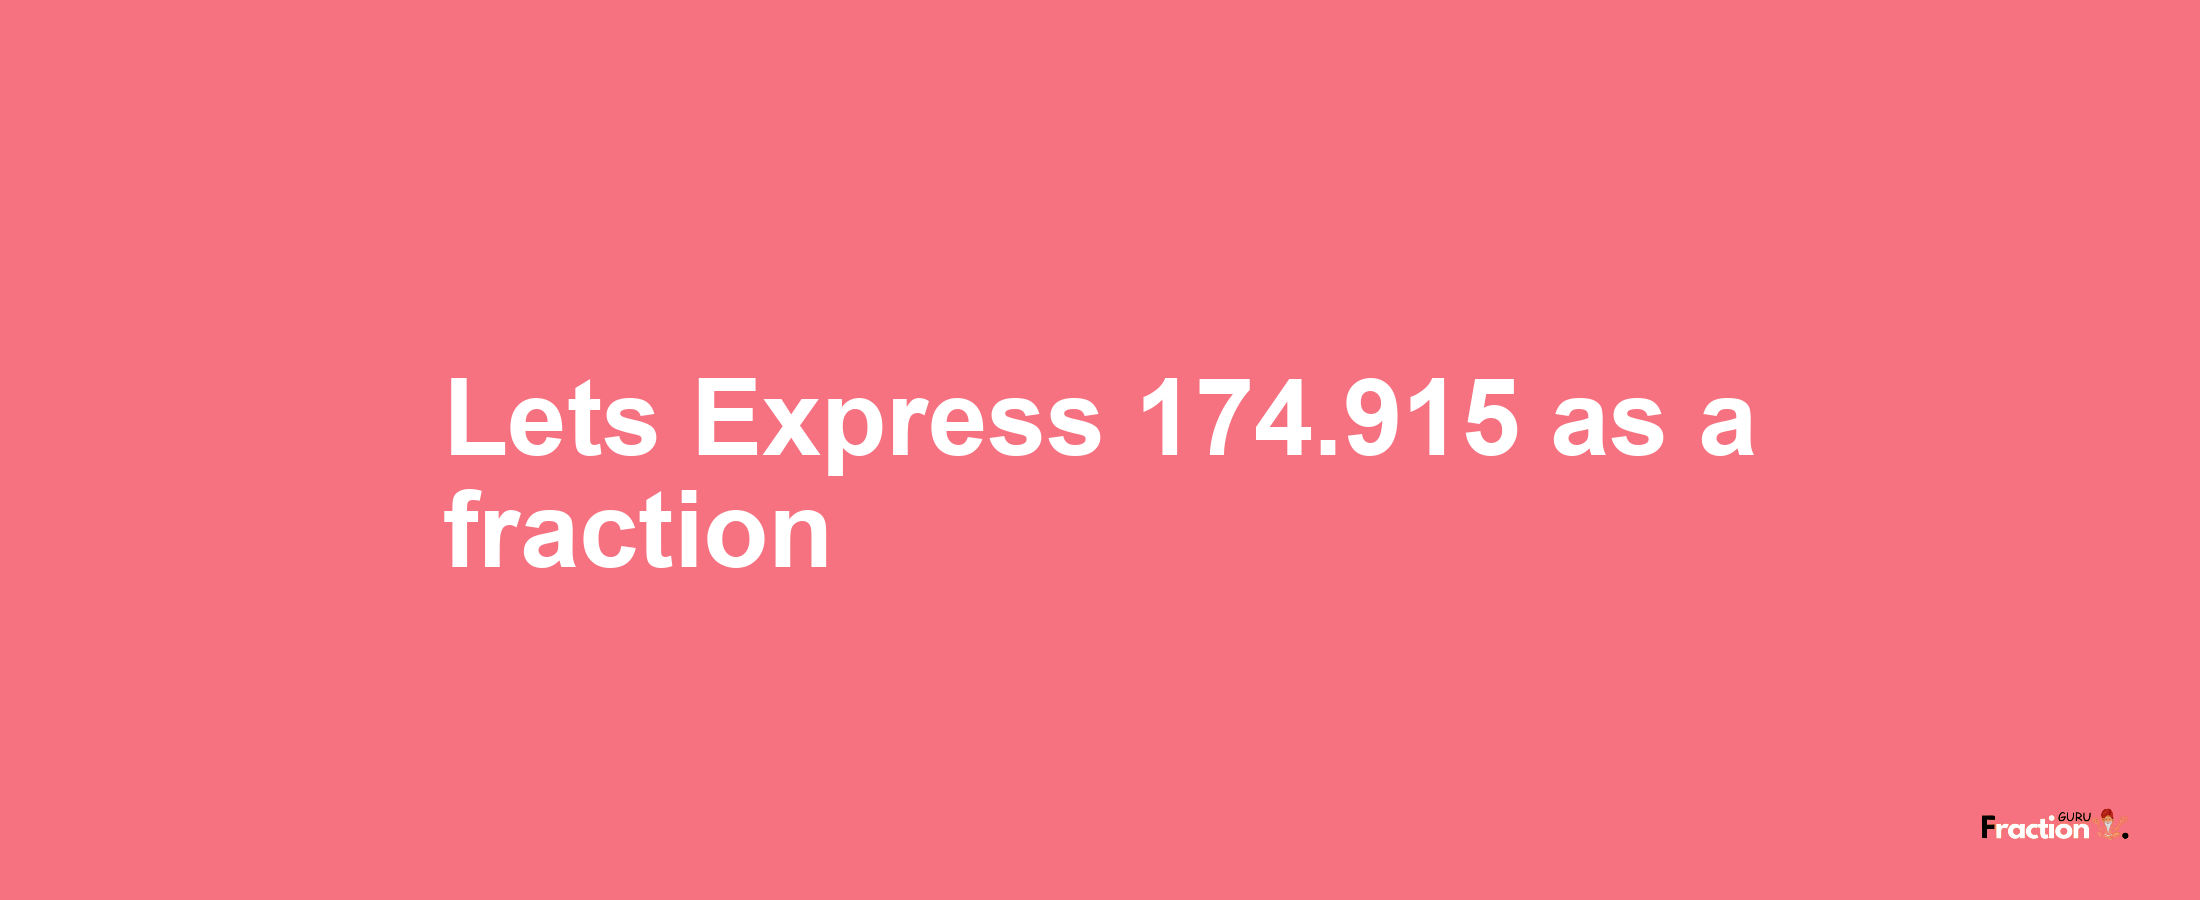 Lets Express 174.915 as afraction